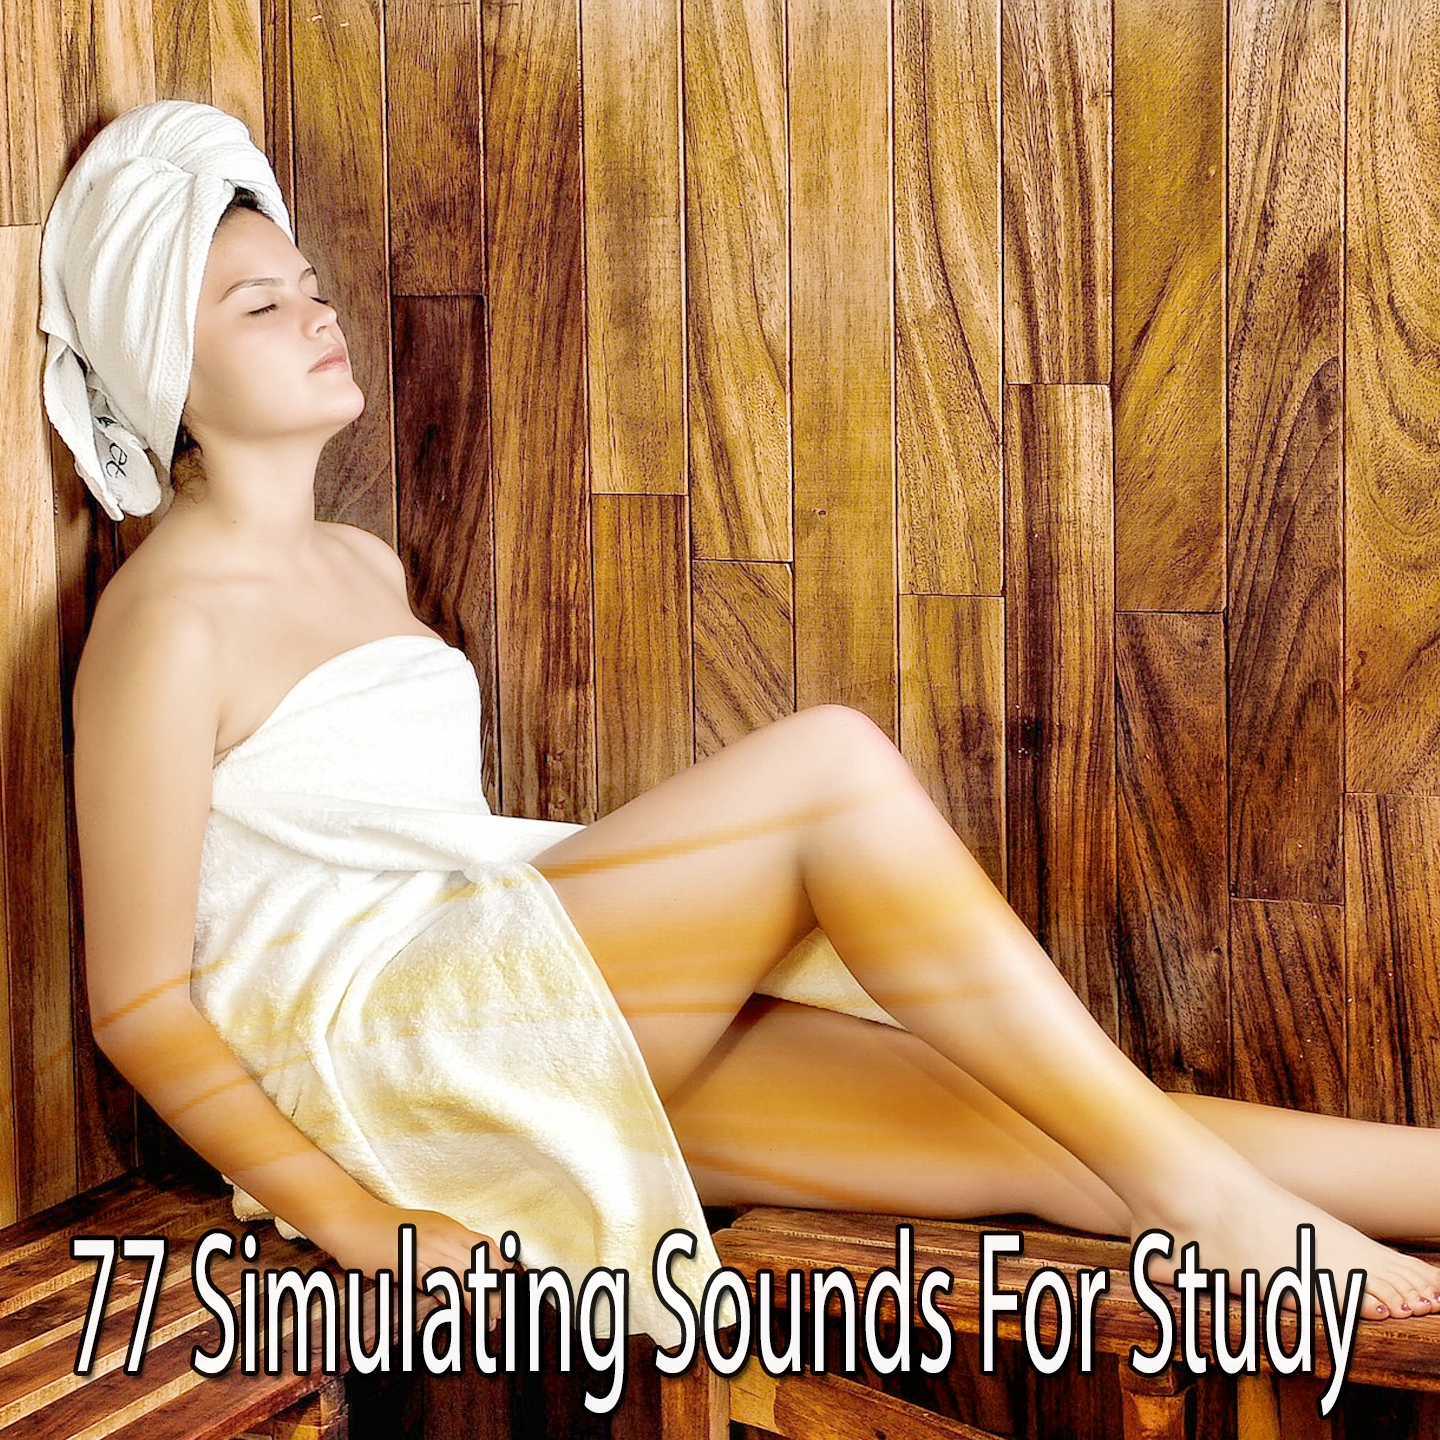 77 Simulating Sounds For Study